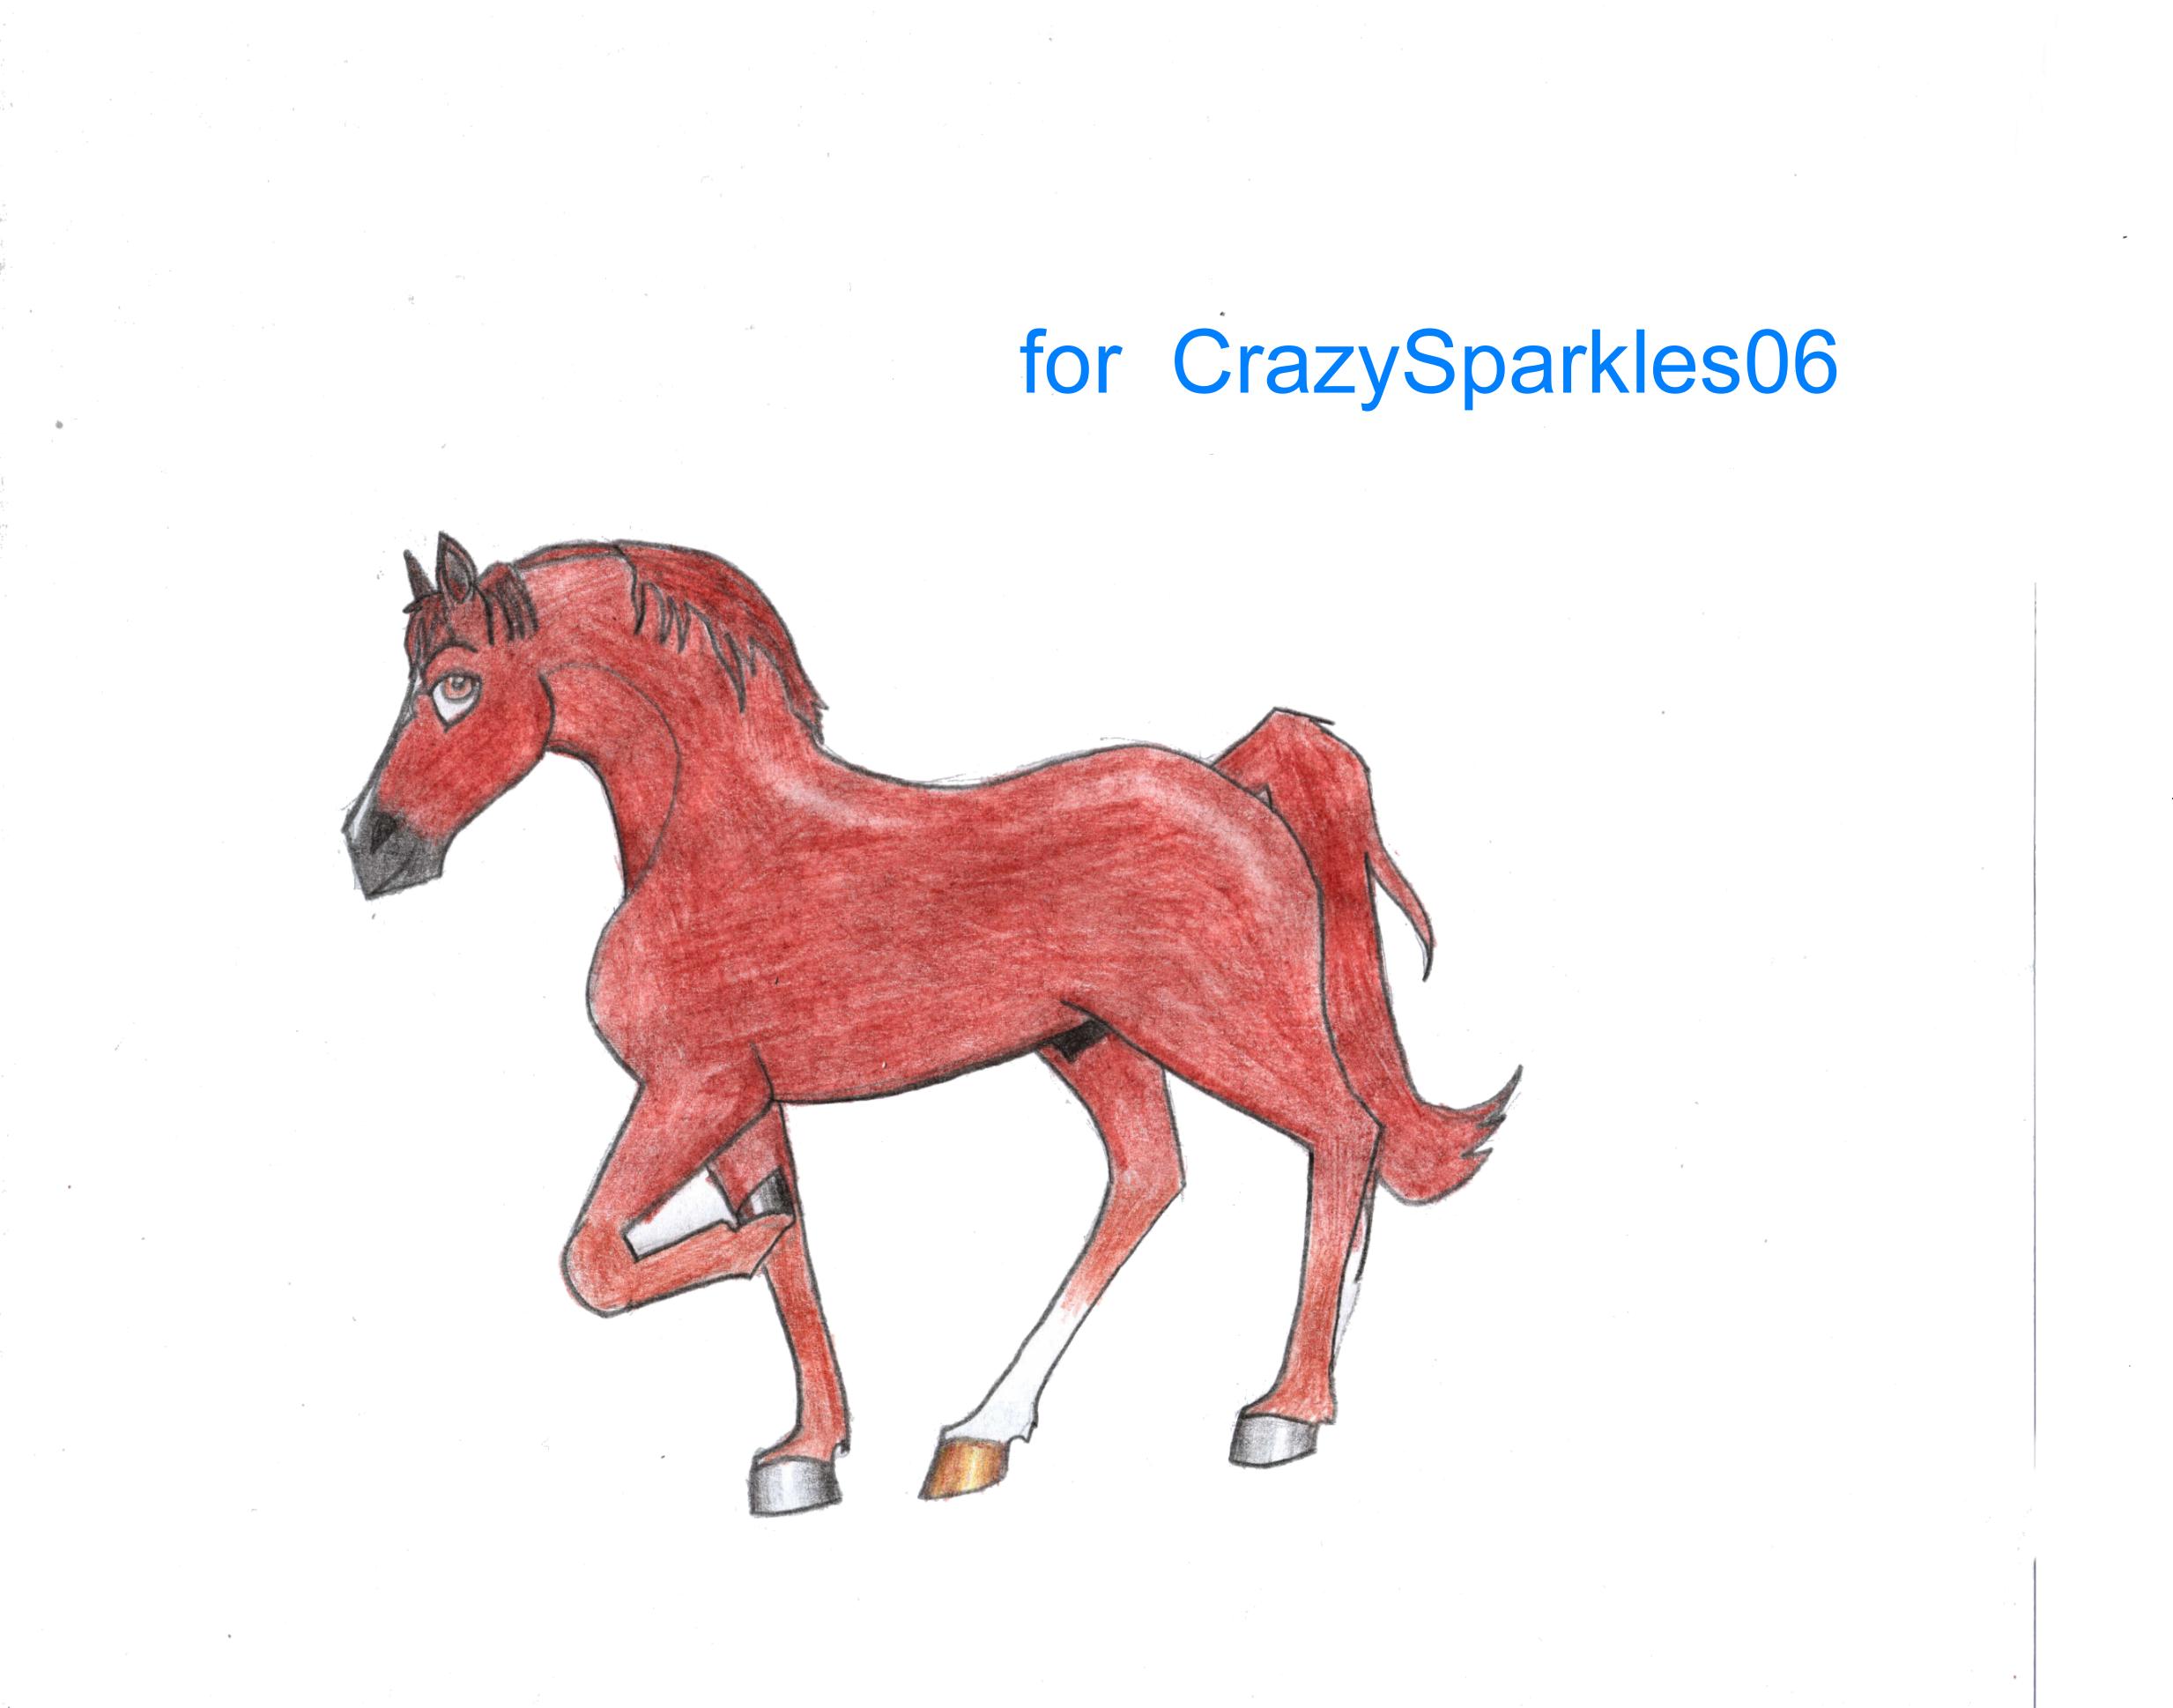 request for CrazySparkles06 by DaniPhantom92